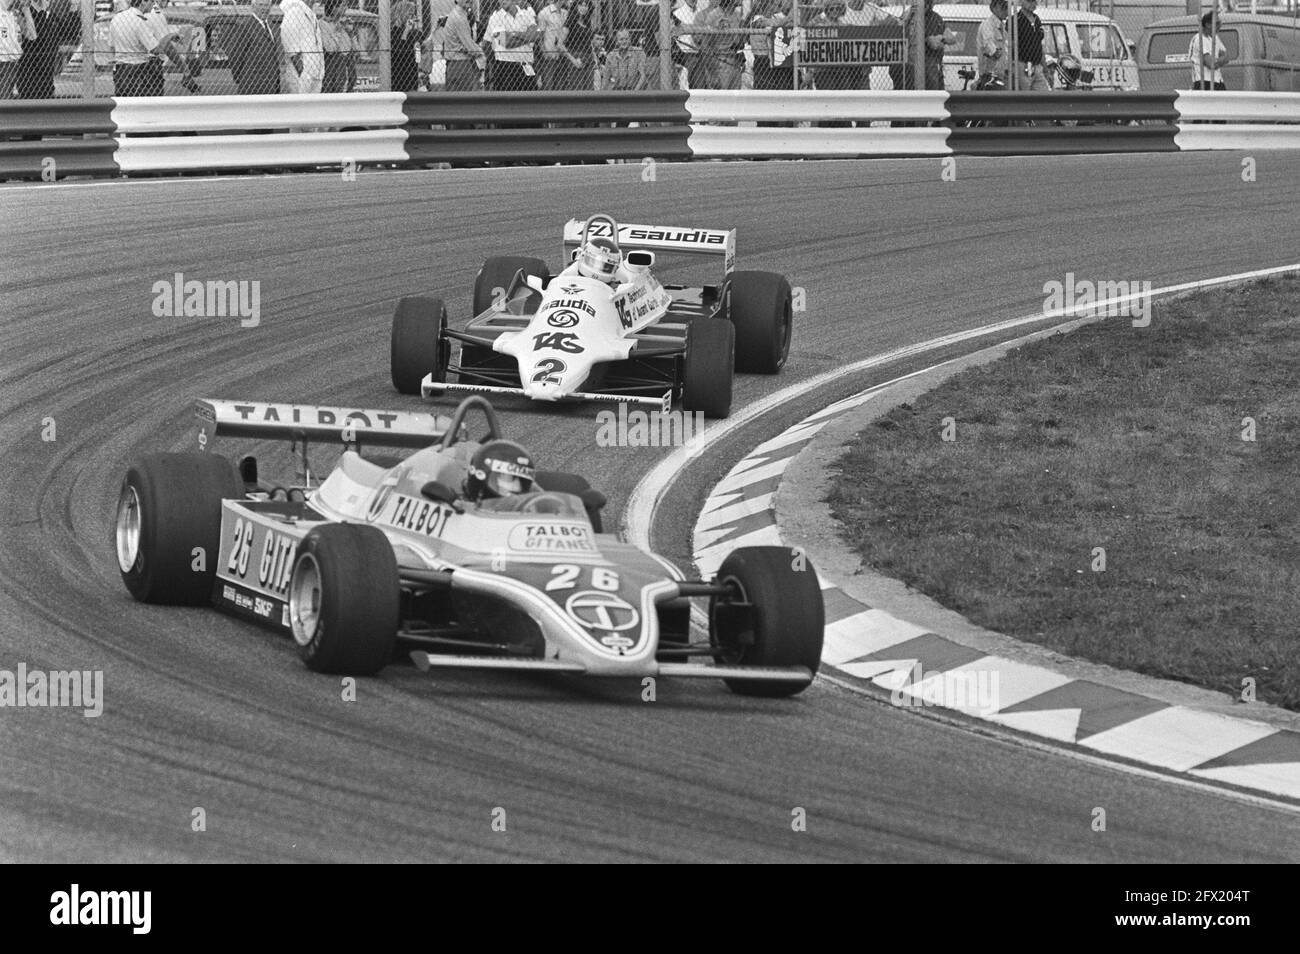 In the foreground French driver Jacques Lafitte in a Ligier-Matra followed by Argentine Carlos Reutemann with Williams-Ford during the Grand Prix Formula 1 at Zandvoort, August 30, 1981, Grand Prix Zandvoort, Grand Prix of the Netherlands, racing drivers, circuits, race cars, races, competitions, The Netherlands, 20th century press agency photo, news to remember, documentary, historic photography 1945-1990, visual stories, human history of the Twentieth Century, capturing moments in time Stock Photo